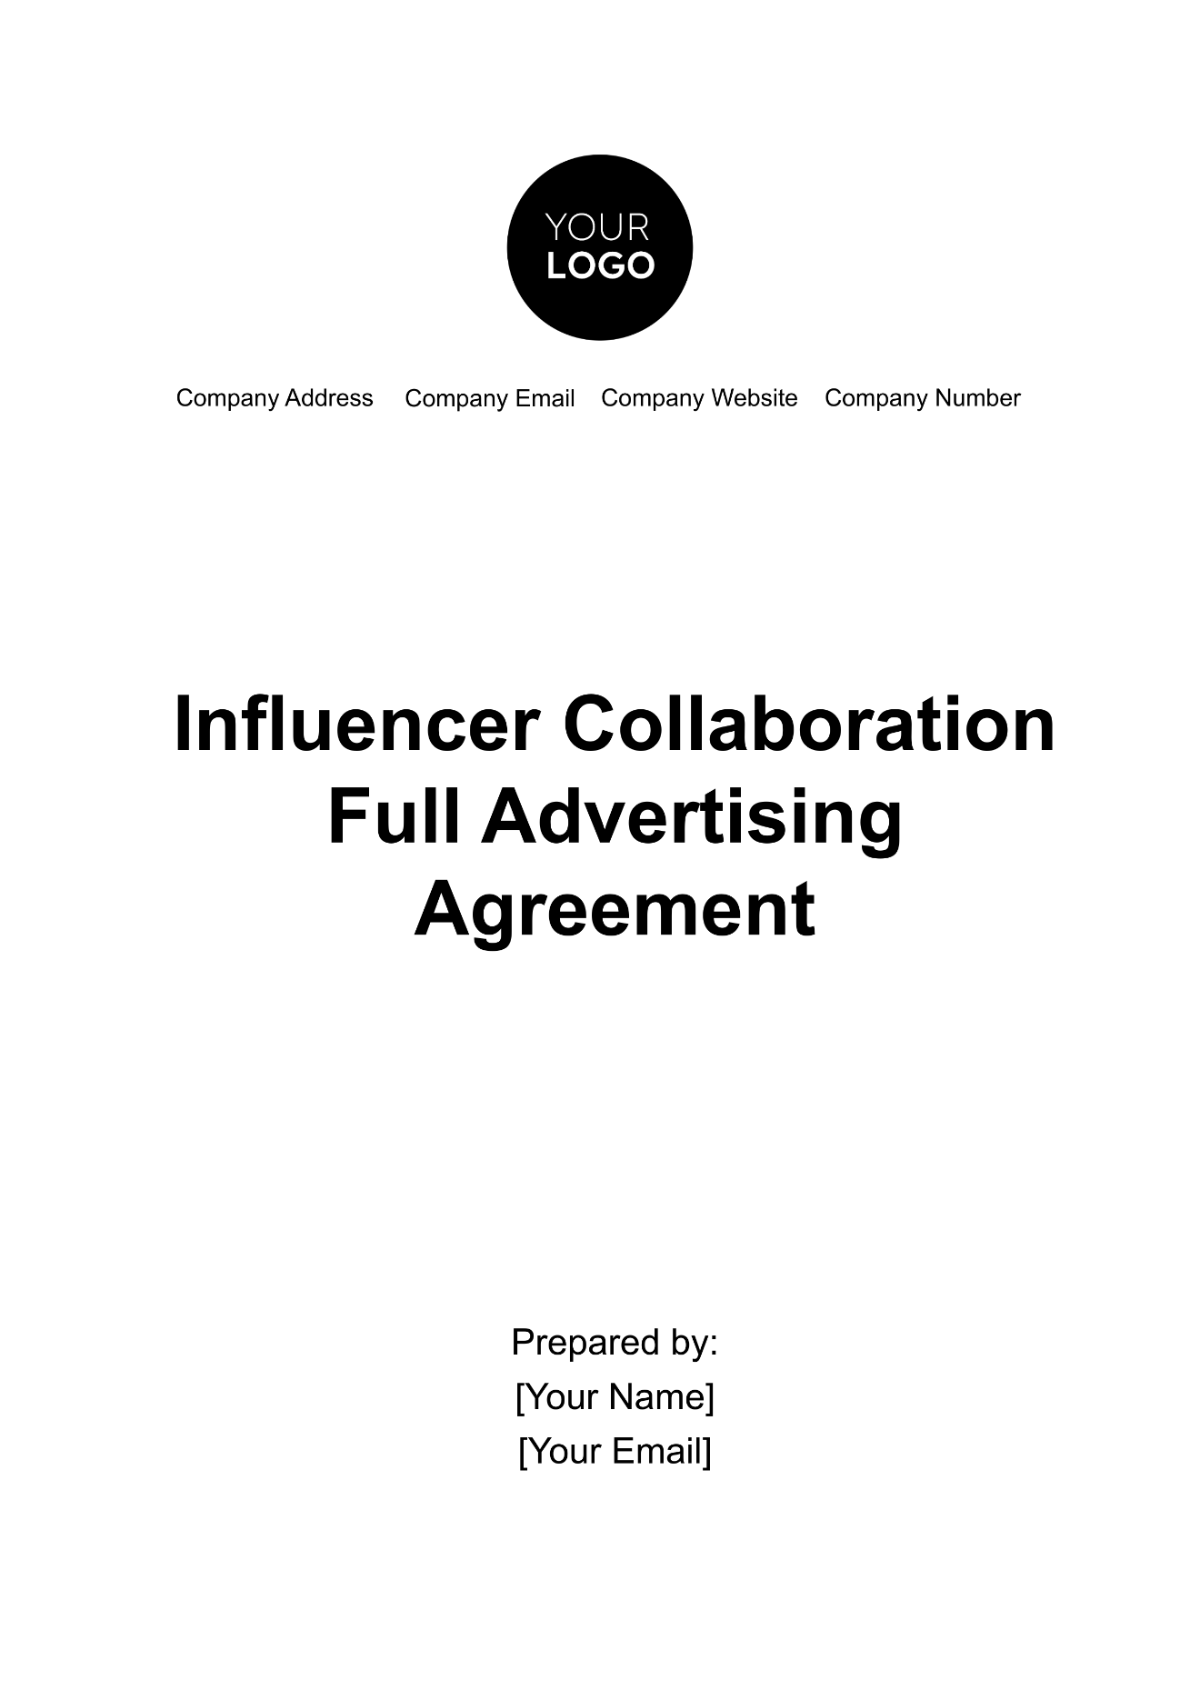 Free Influencer Collaboration Full Advertising Agreement Template